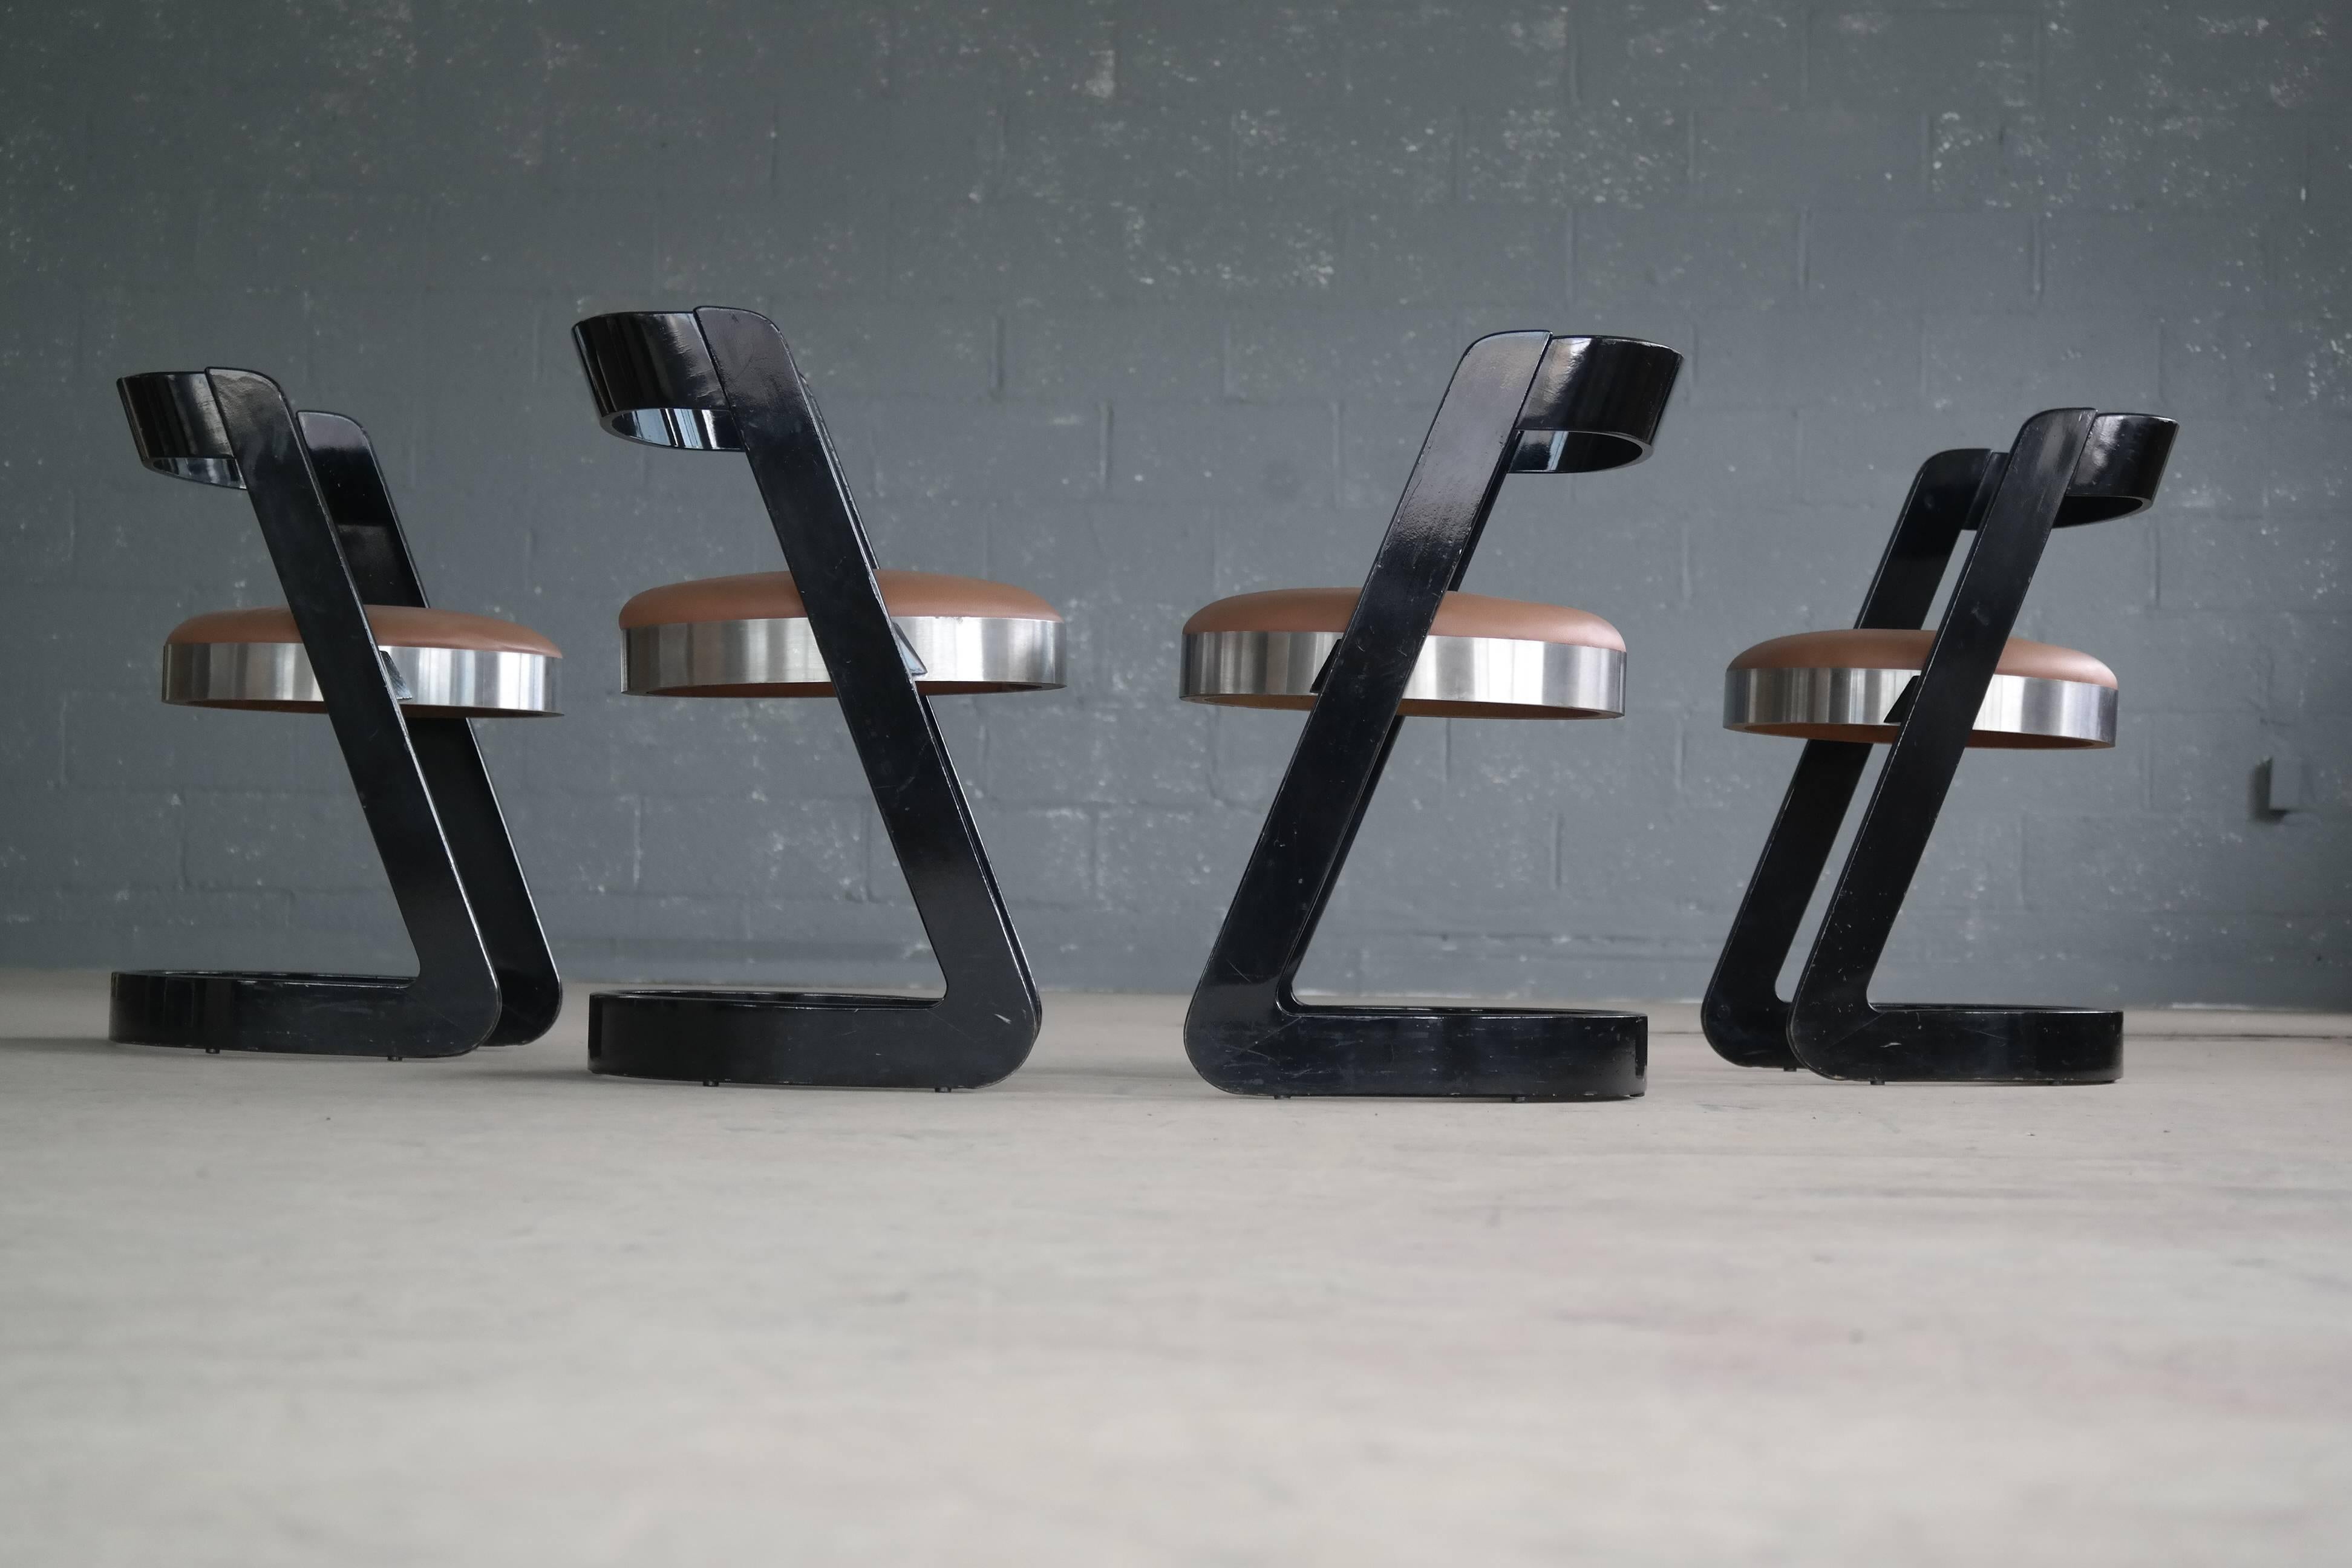 Superb set of four Willy Rizzo designed cantilevered dining chairs in black lacquered bentwood with seats of aluminum and cognac colored vinyl. Made around 1970 by Mario Sabot. The wooden structure is formed of two diagonal supports resting on a